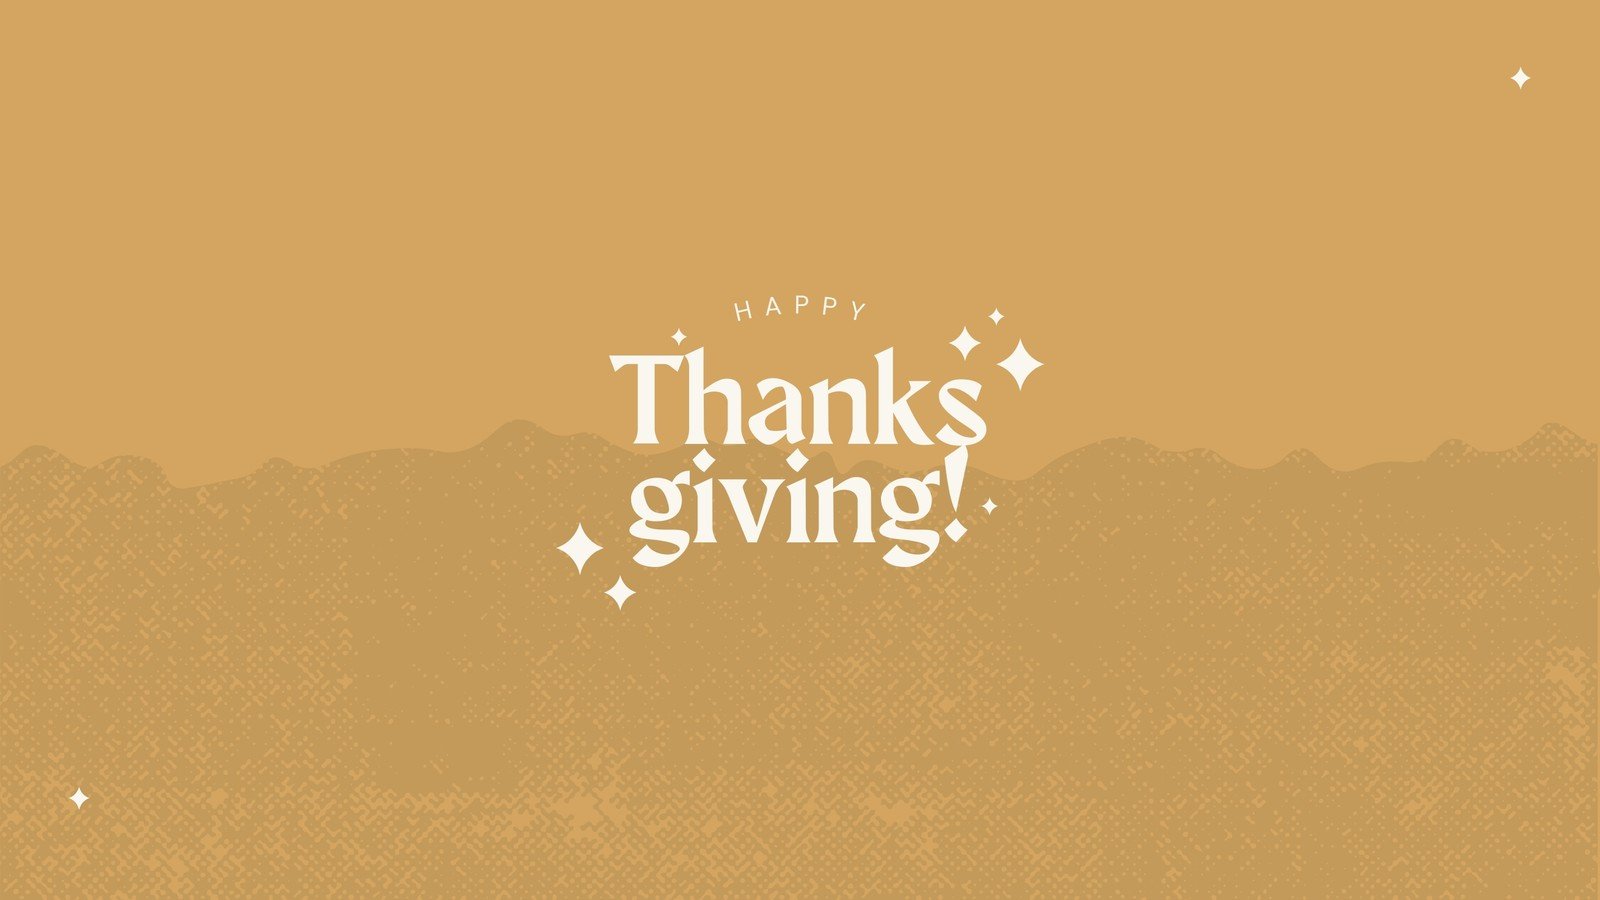 HD wallpaper 2014 Happy Thanksgiving Themed Desktop Wallpaper offer thanks  unto the lord text  Wallpaper Flare